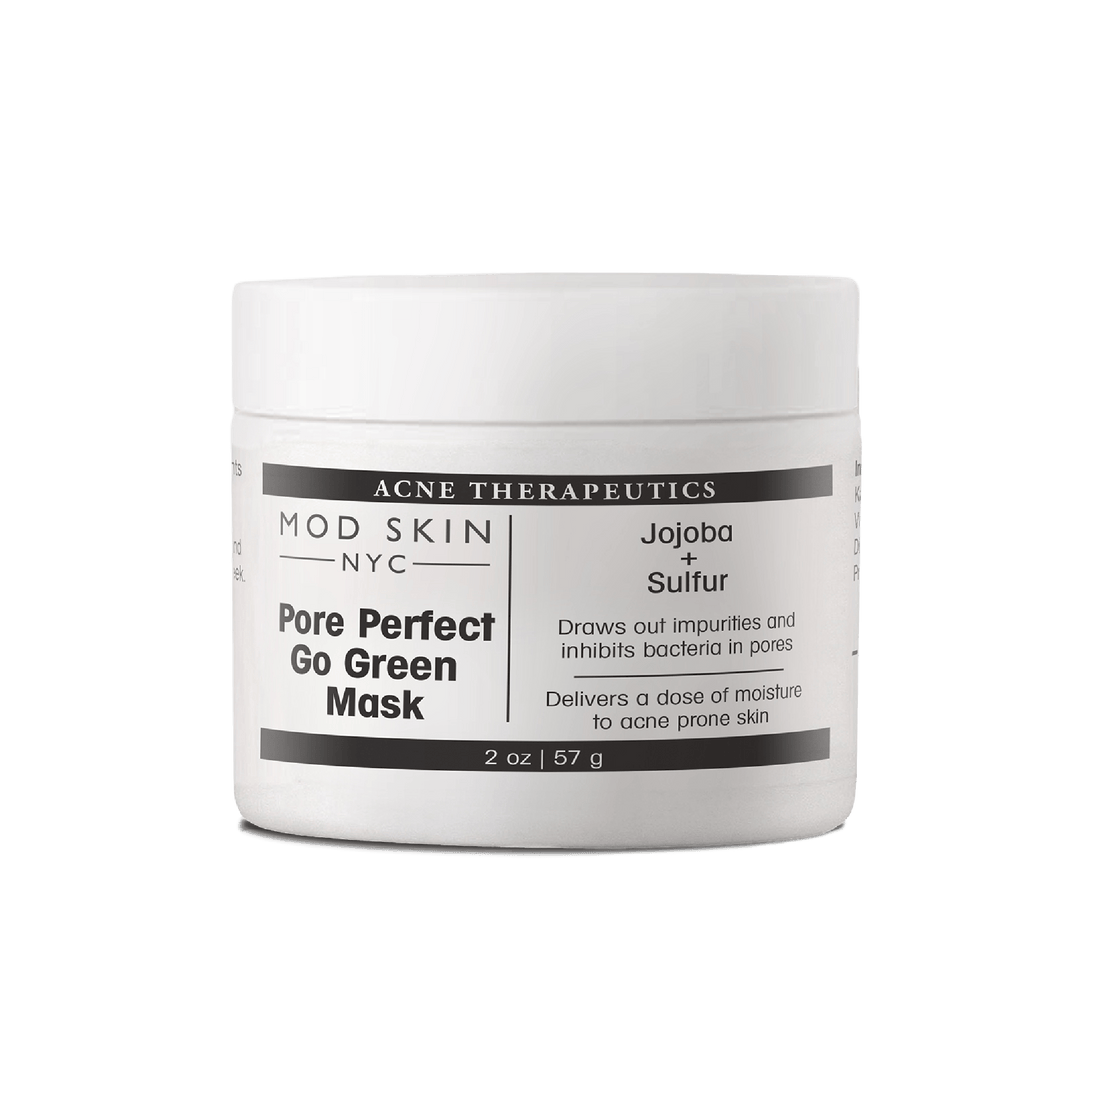 MOD SKIN NYC Pore Perfect Go Green Mask (57 g / 2.00 oz) - The DLG Store